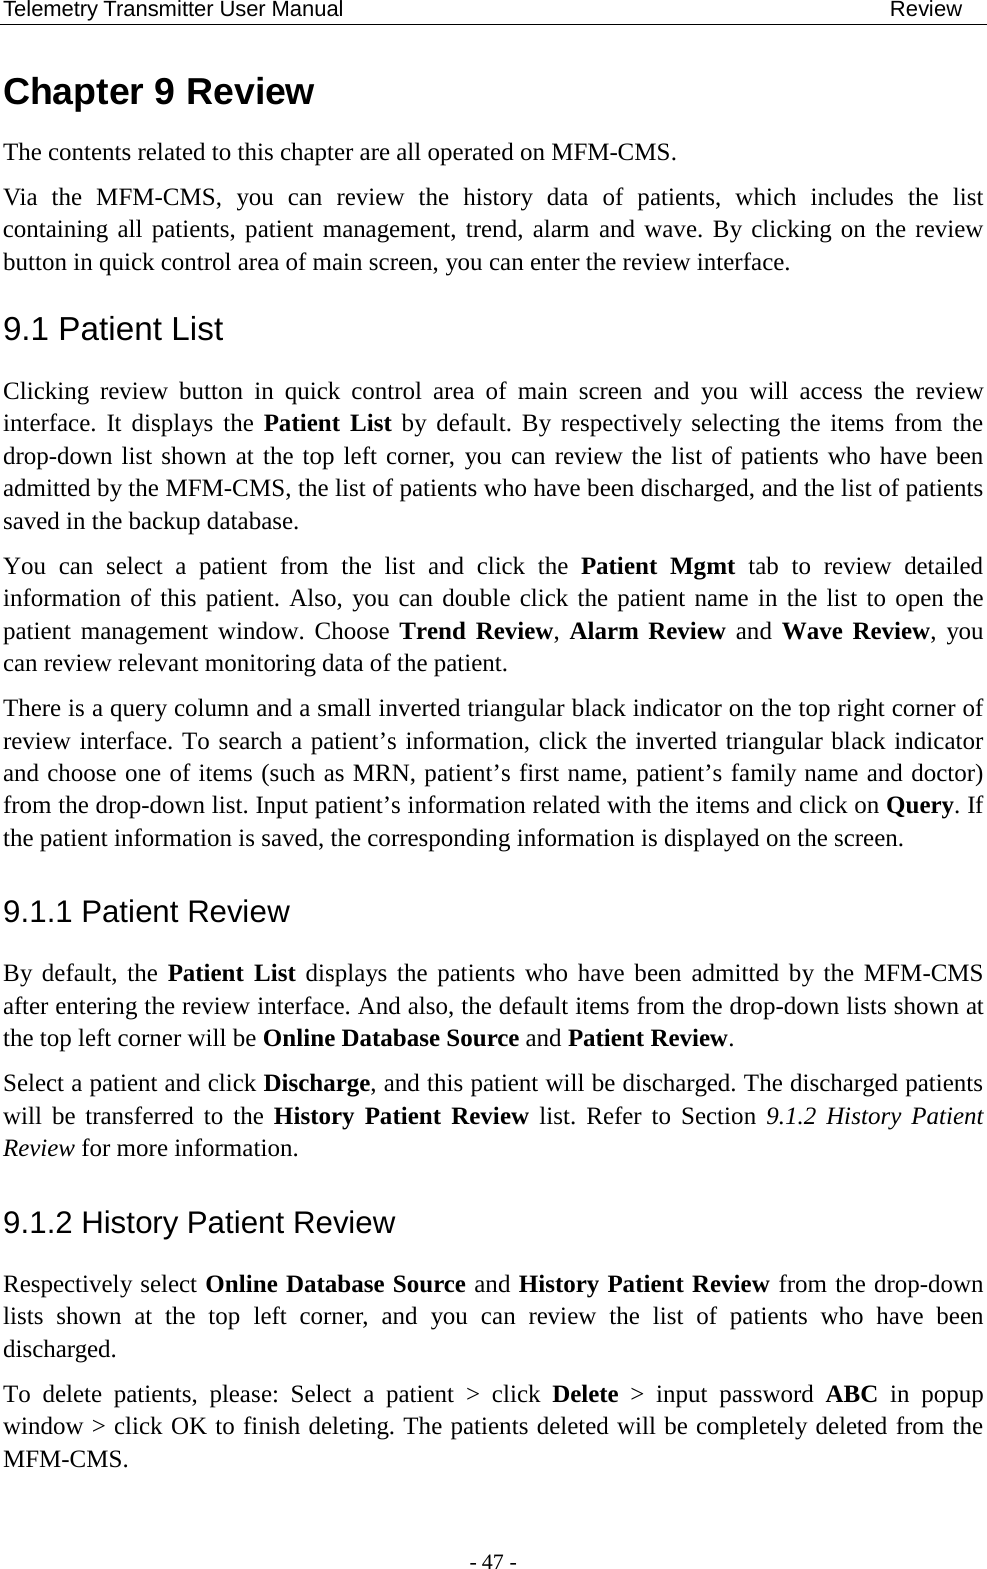 Telemetry Transmitter User Manual                                                  Review Chapter 9 Review The contents related to this chapter are all operated on MFM-CMS. Via the MFM-CMS, you can review the history data of patients, which  includes  the list containing all patients, patient management, trend, alarm and wave. By clicking on the review button in quick control area of main screen, you can enter the review interface.   9.1 Patient List Clicking  review  button  in quick control area of main  screen  and  you  will access  the  review interface. It displays the Patient List by default. By respectively selecting the items from the drop-down list shown at the top left corner, you can review the list of patients who have been admitted by the MFM-CMS, the list of patients who have been discharged, and the list of patients saved in the backup database. You can select a patient from the list and click the Patient Mgmt tab to review detailed information of this patient. Also, you can double click the patient name in the list to open the patient management window. Choose Trend Review, Alarm Review and Wave Review, you can review relevant monitoring data of the patient. There is a query column and a small inverted triangular black indicator on the top right corner of review interface. To search a patient’s information, click the inverted triangular black indicator and choose one of items (such as MRN, patient’s first name, patient’s family name and doctor) from the drop-down list. Input patient’s information related with the items and click on Query. If the patient information is saved, the corresponding information is displayed on the screen. 9.1.1 Patient Review By default, the  Patient List displays the patients who have been admitted by the MFM-CMS after entering the review interface. And also, the default items from the drop-down lists shown at the top left corner will be Online Database Source and Patient Review. Select a patient and click Discharge, and this patient will be discharged. The discharged patients will be transferred to the History Patient Review list. Refer to Section 9.1.2 History Patient Review for more information. 9.1.2 History Patient Review Respectively select Online Database Source and History Patient Review from the drop-down lists shown at the top left corner, and you can review the list of patients who have been discharged. To delete patients, please: Select a patient &gt;  click  Delete &gt; input password ABC in popup window &gt; click OK to finish deleting. The patients deleted will be completely deleted from the MFM-CMS.  - 47 - 